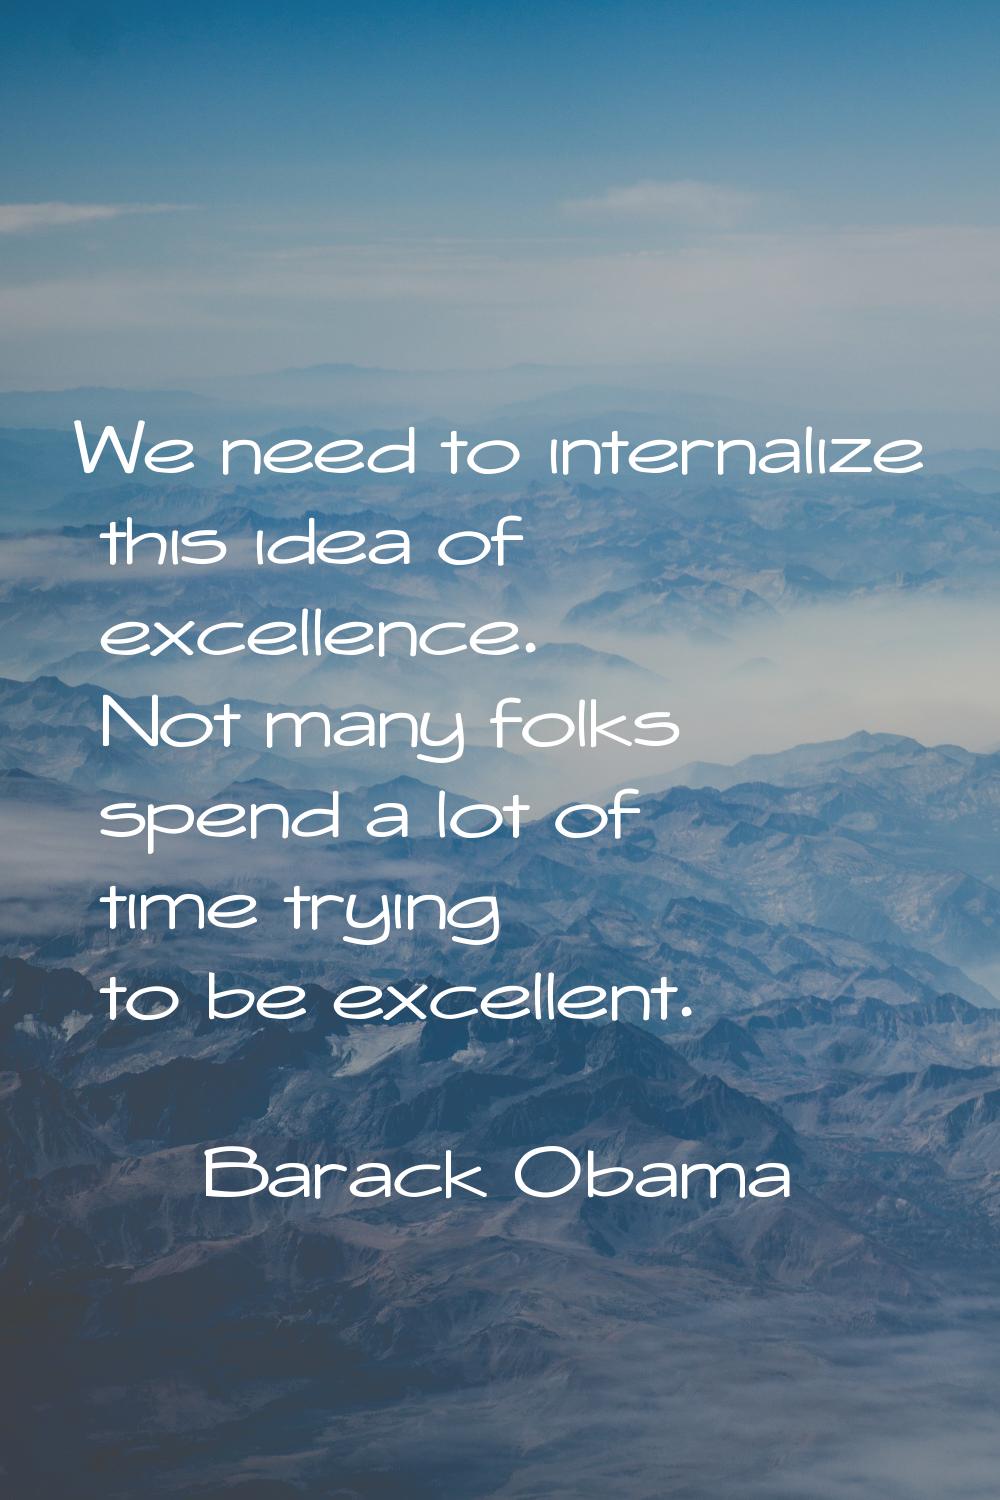 We need to internalize this idea of excellence. Not many folks spend a lot of time trying to be exc